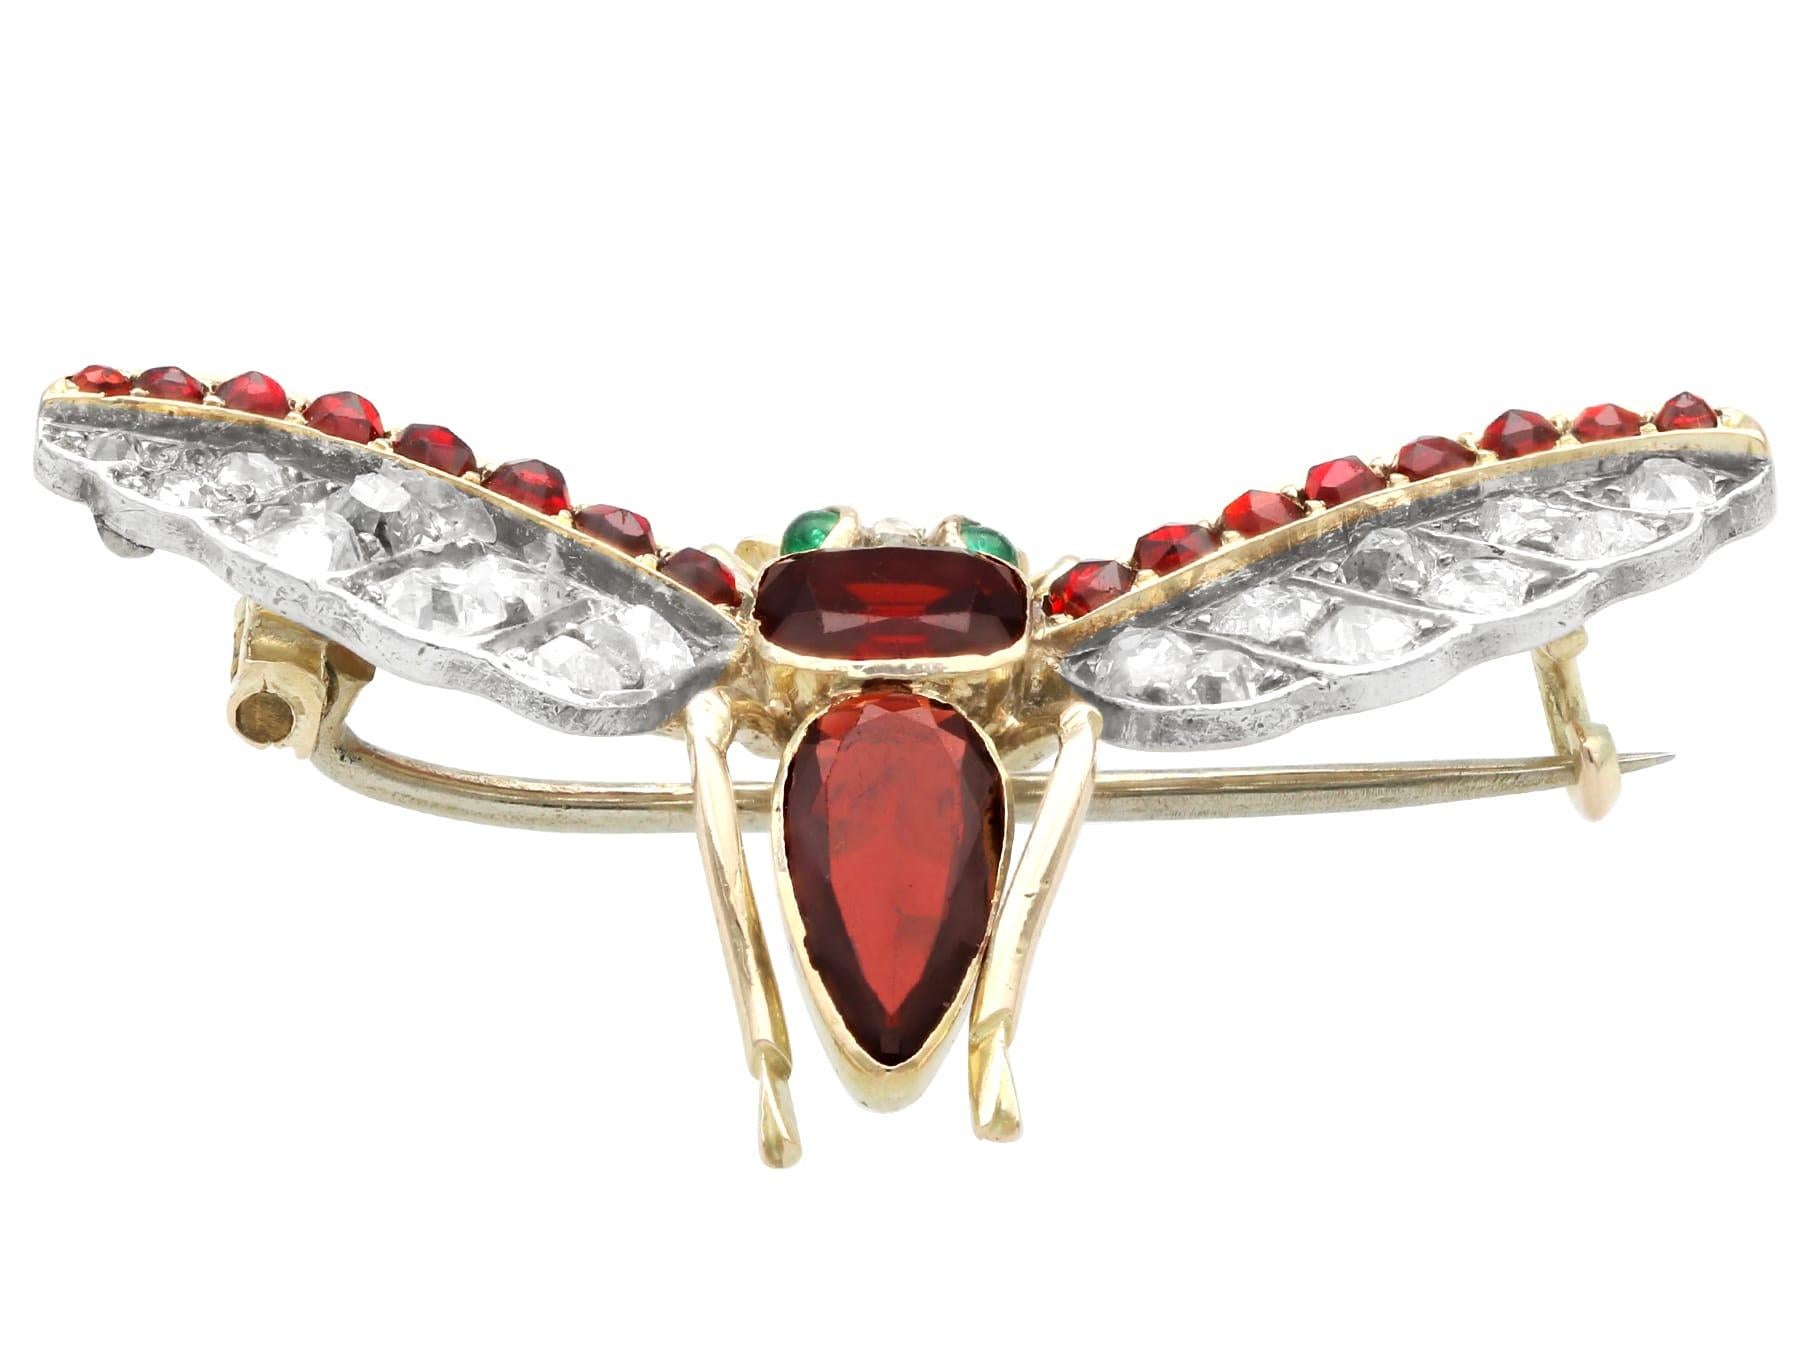 Antique 2.13 Carat Garnet Diamond and Emerald Yellow Gold Insect Pendant In Excellent Condition For Sale In Jesmond, Newcastle Upon Tyne